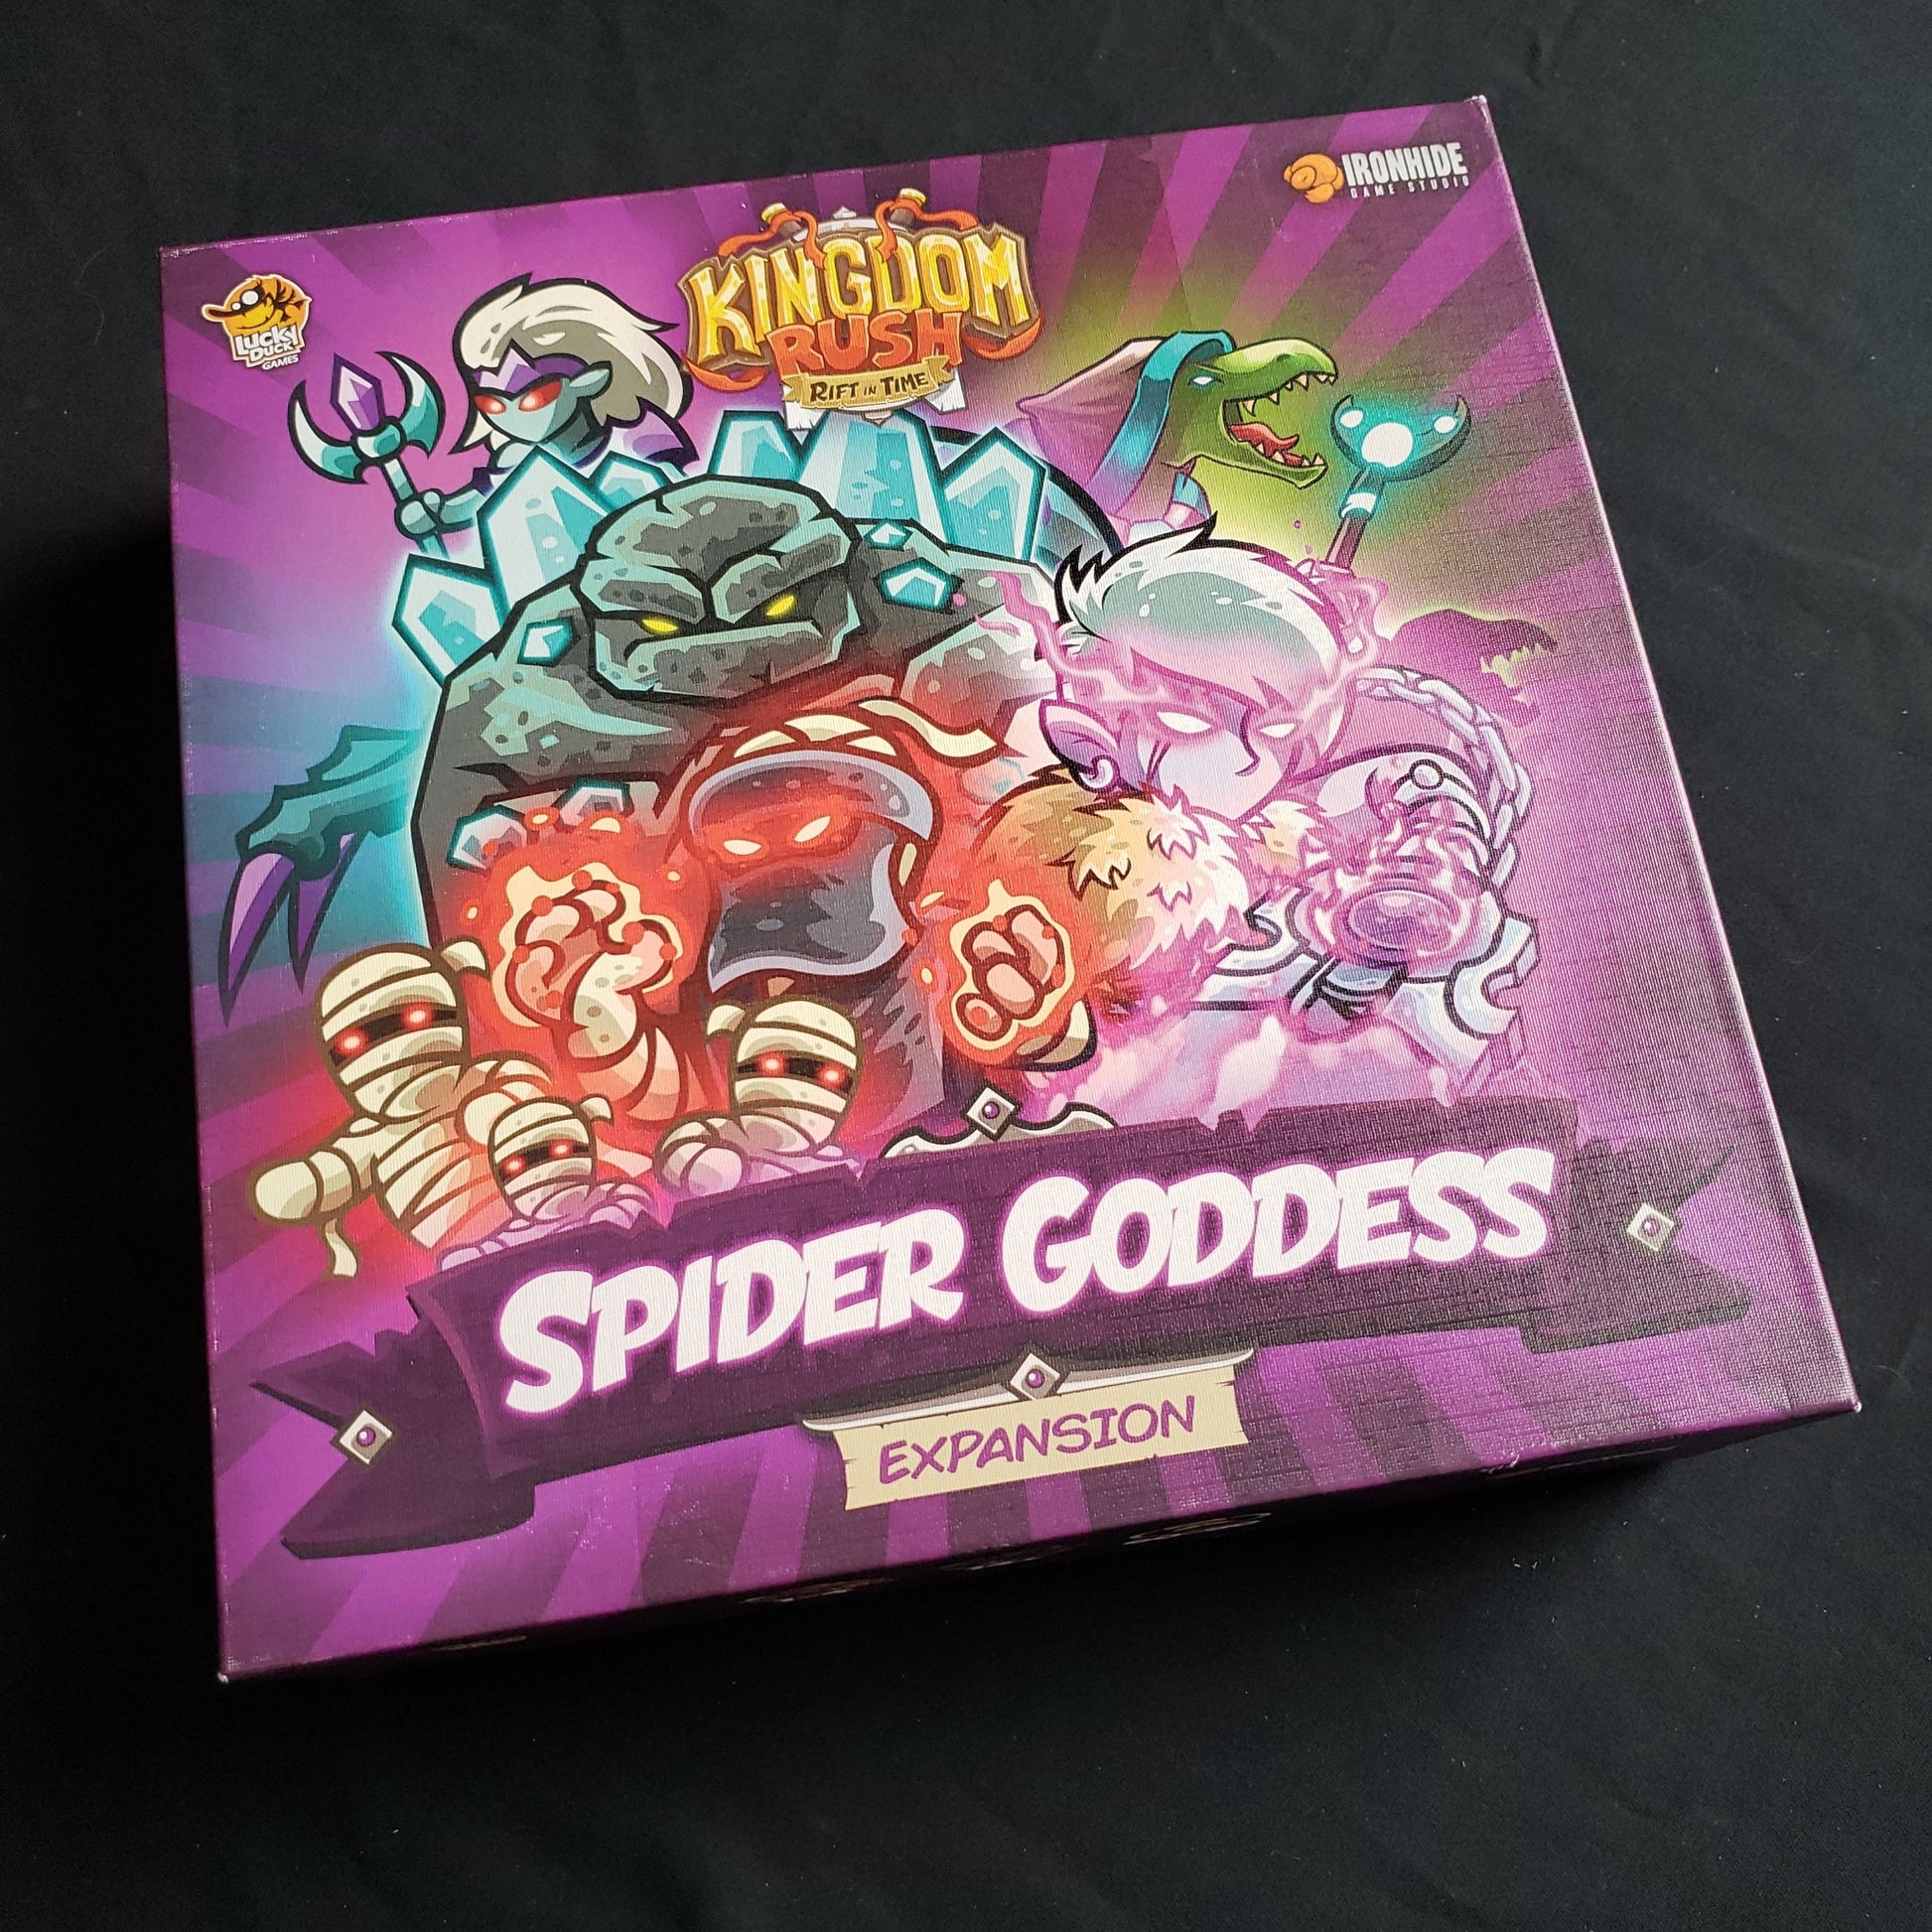 Image shows the front cover of the box of the Spider Goddess expansion for the Kingdom Rush: Rift in Time board game